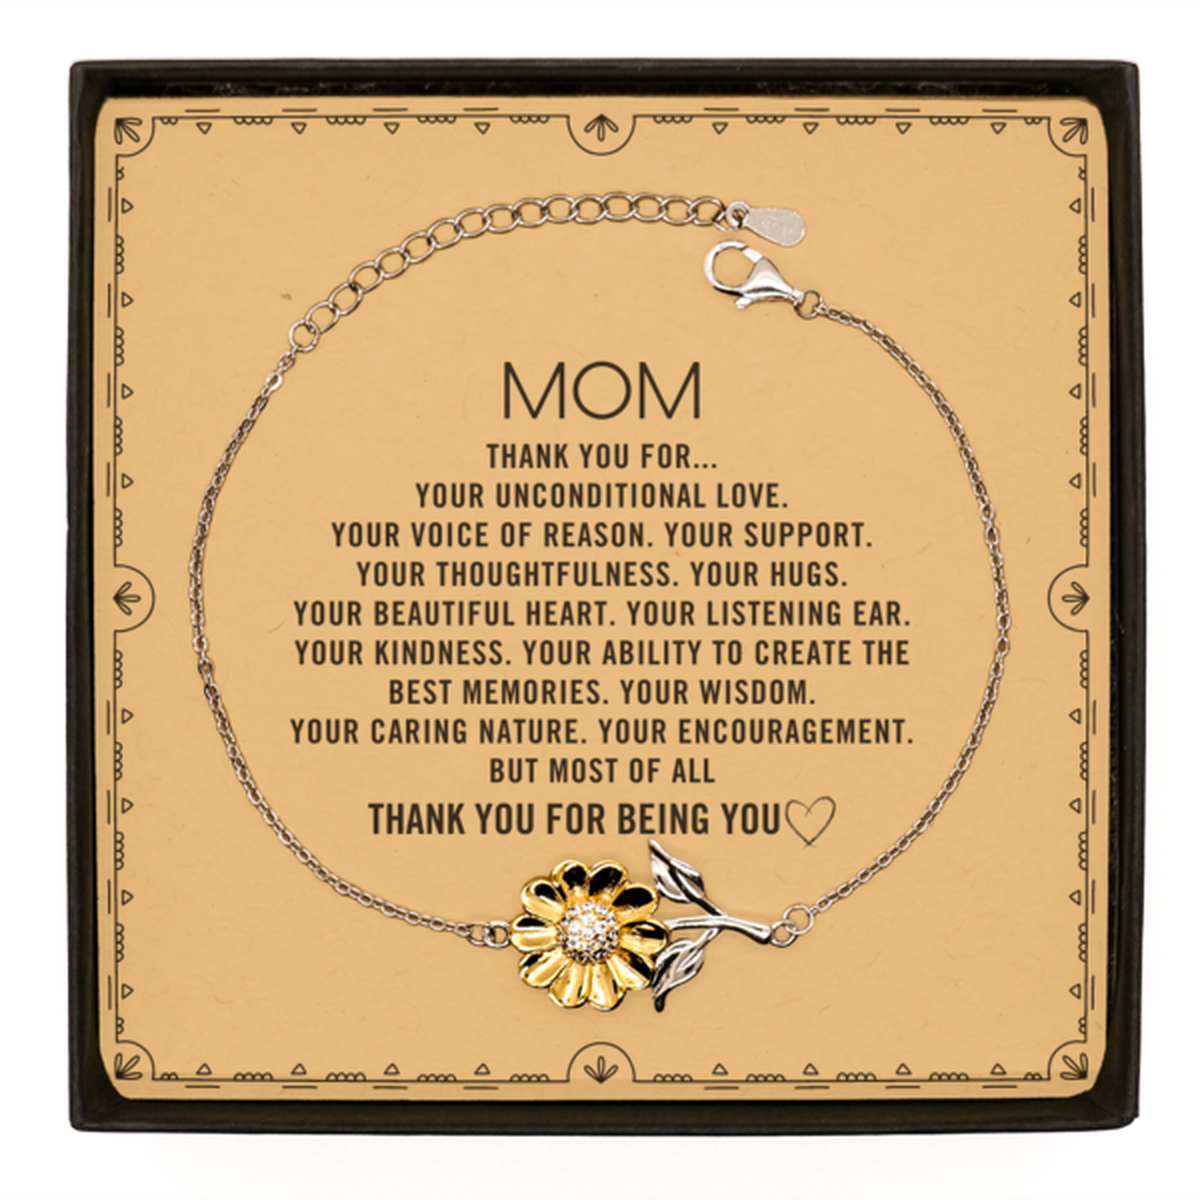 Mom Sunflower Bracelet Custom, Message Card Gifts For Mom Christmas Graduation Birthday Gifts for Men Women Mom Thank you for Your unconditional love